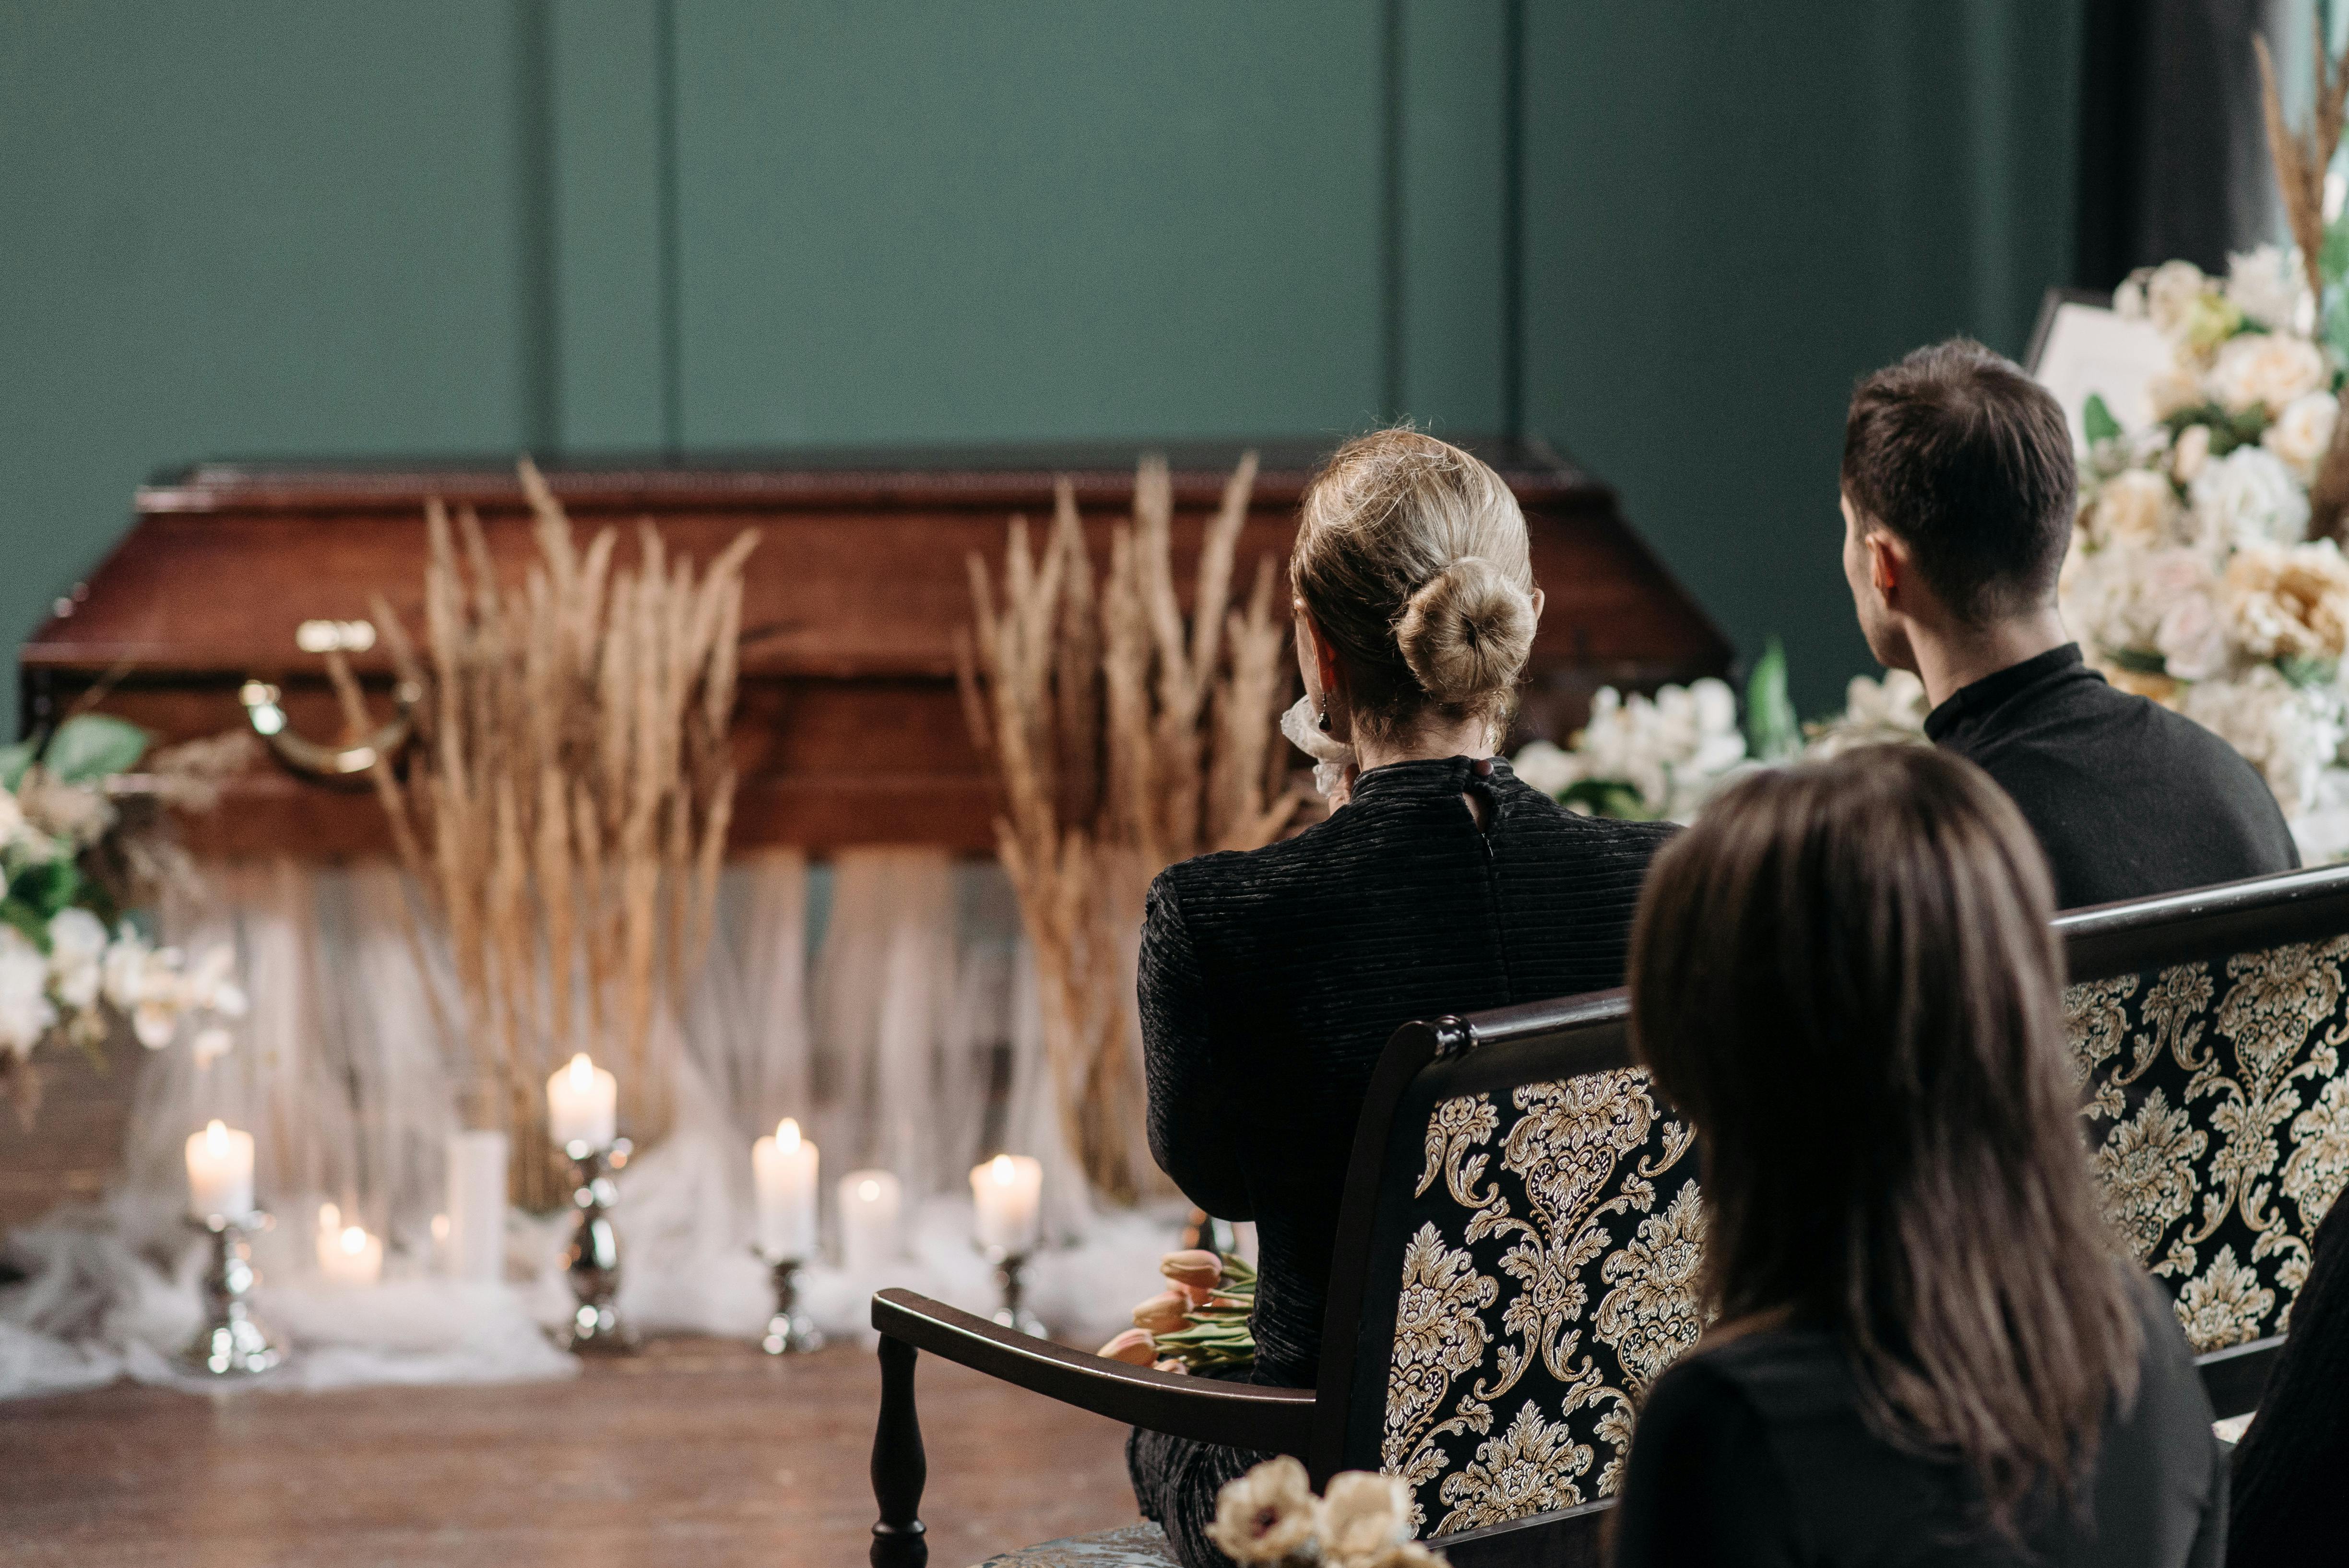 Mourners at a funeral service | Source: Pexels